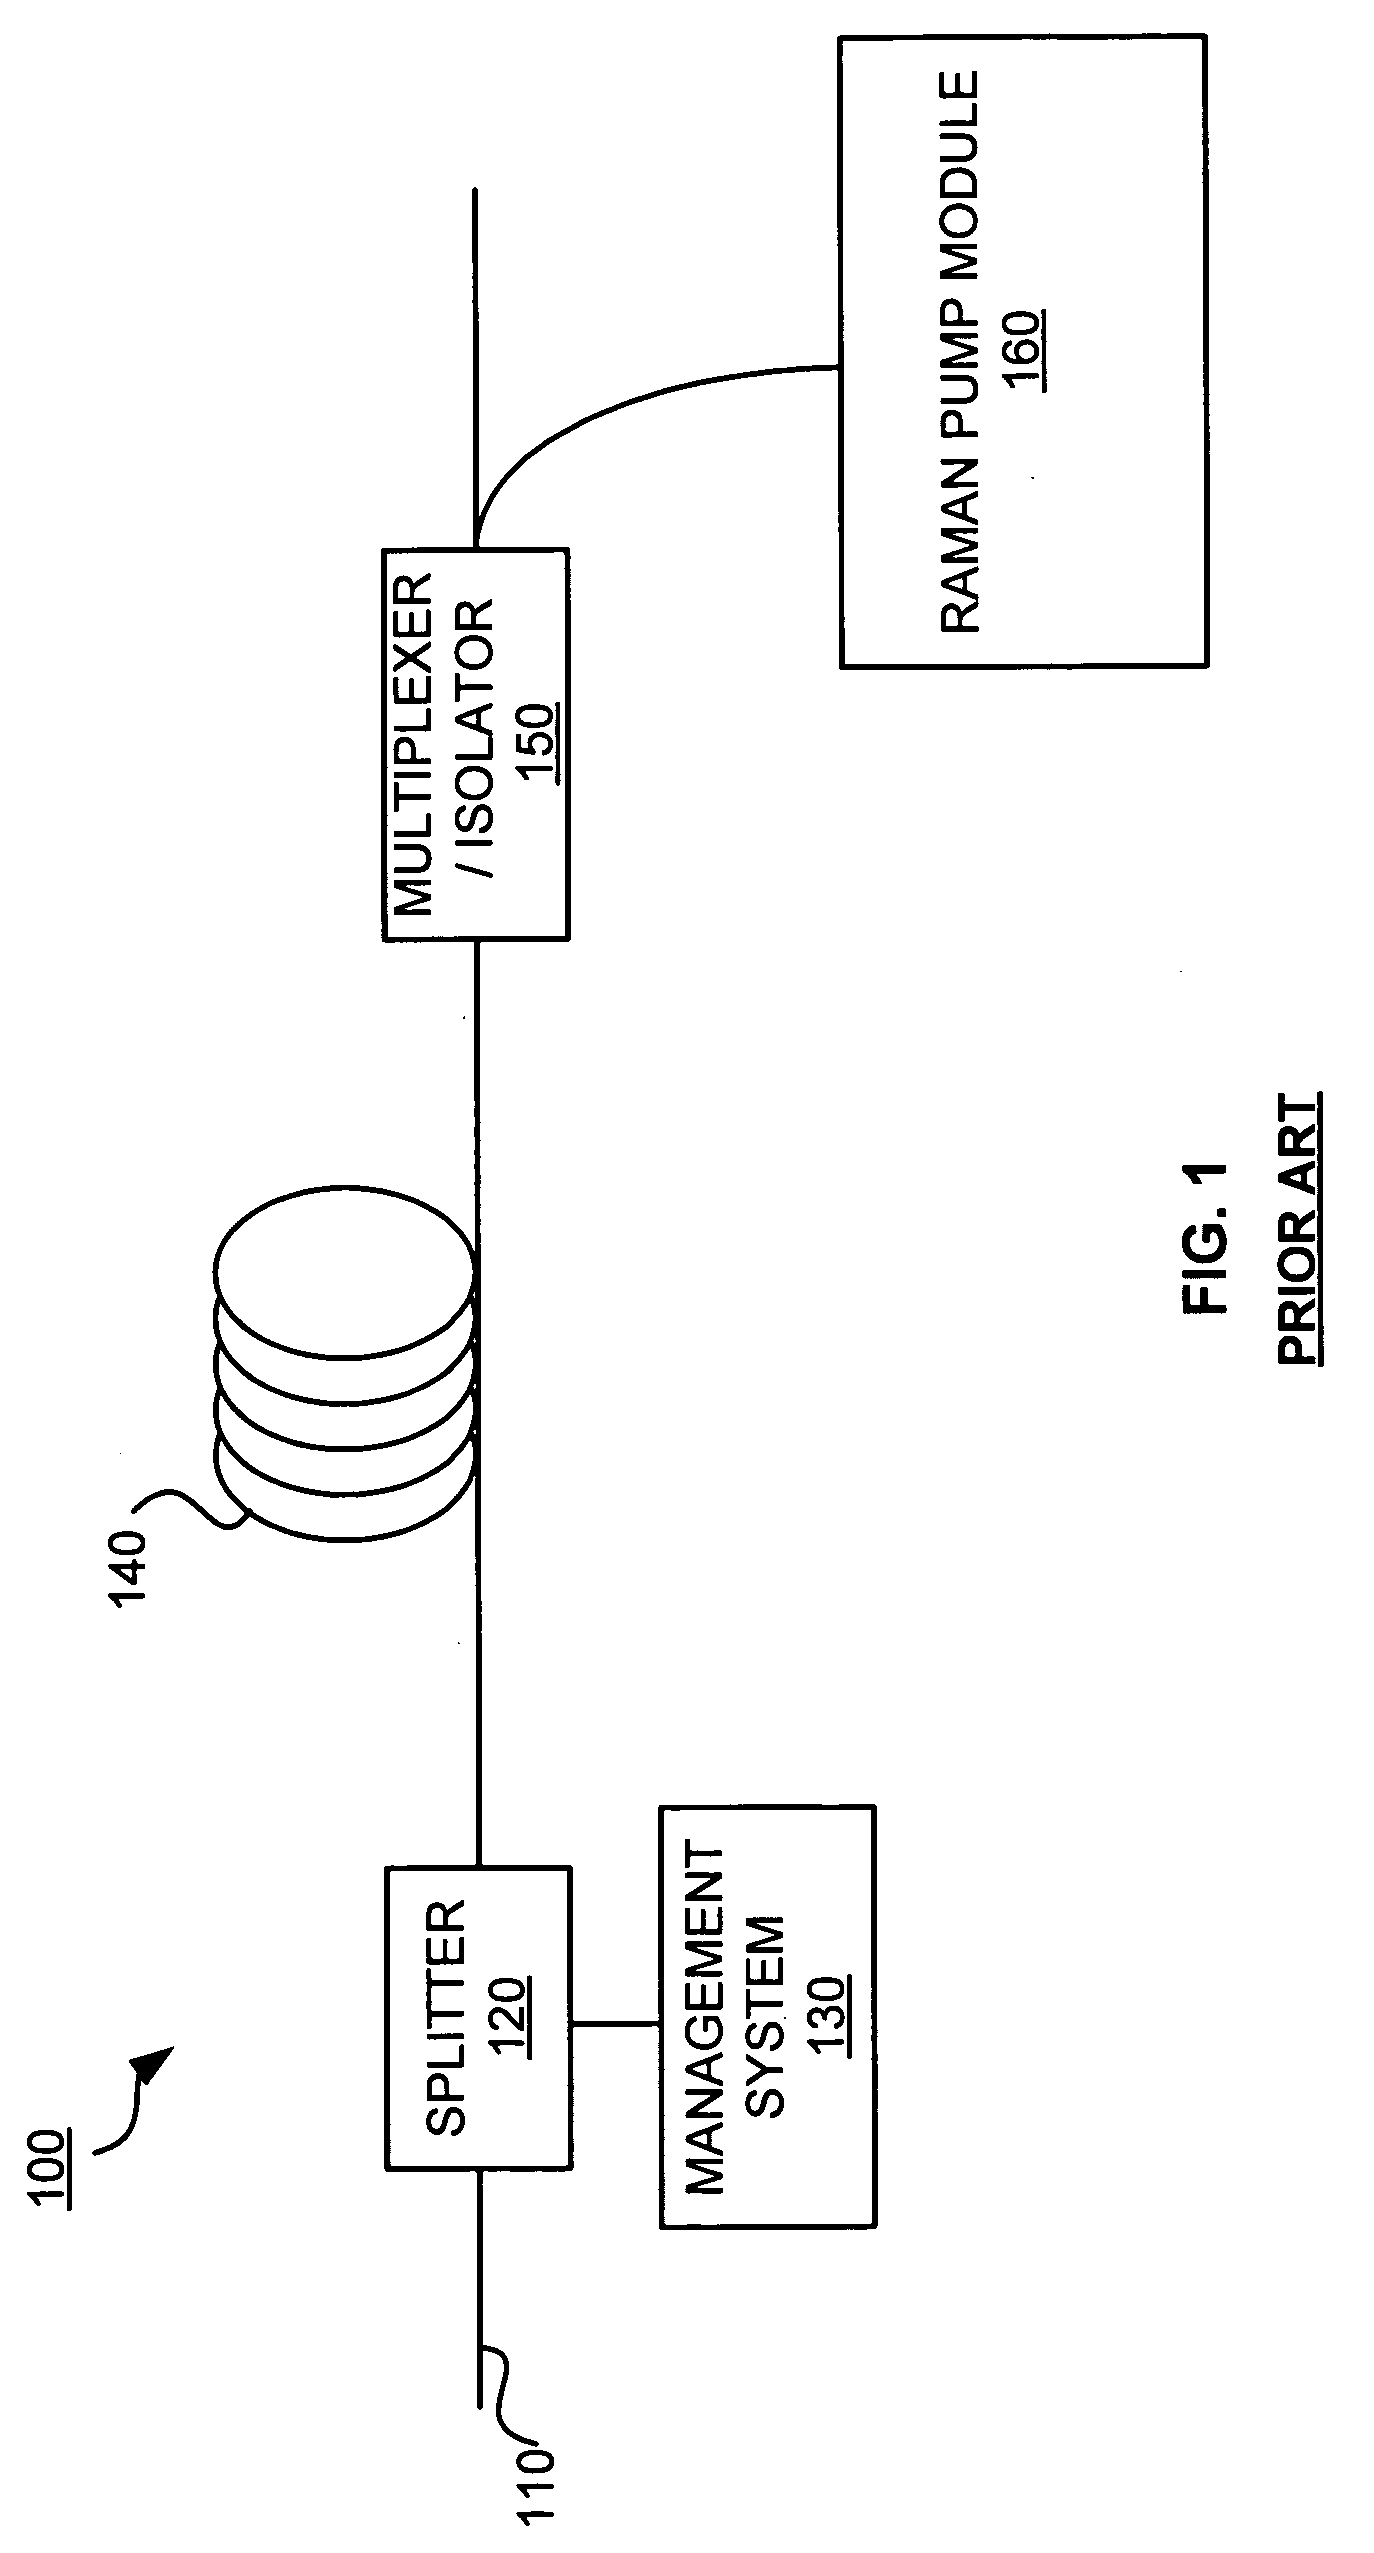 Systems and methods for optical pumping using depolarizing filters